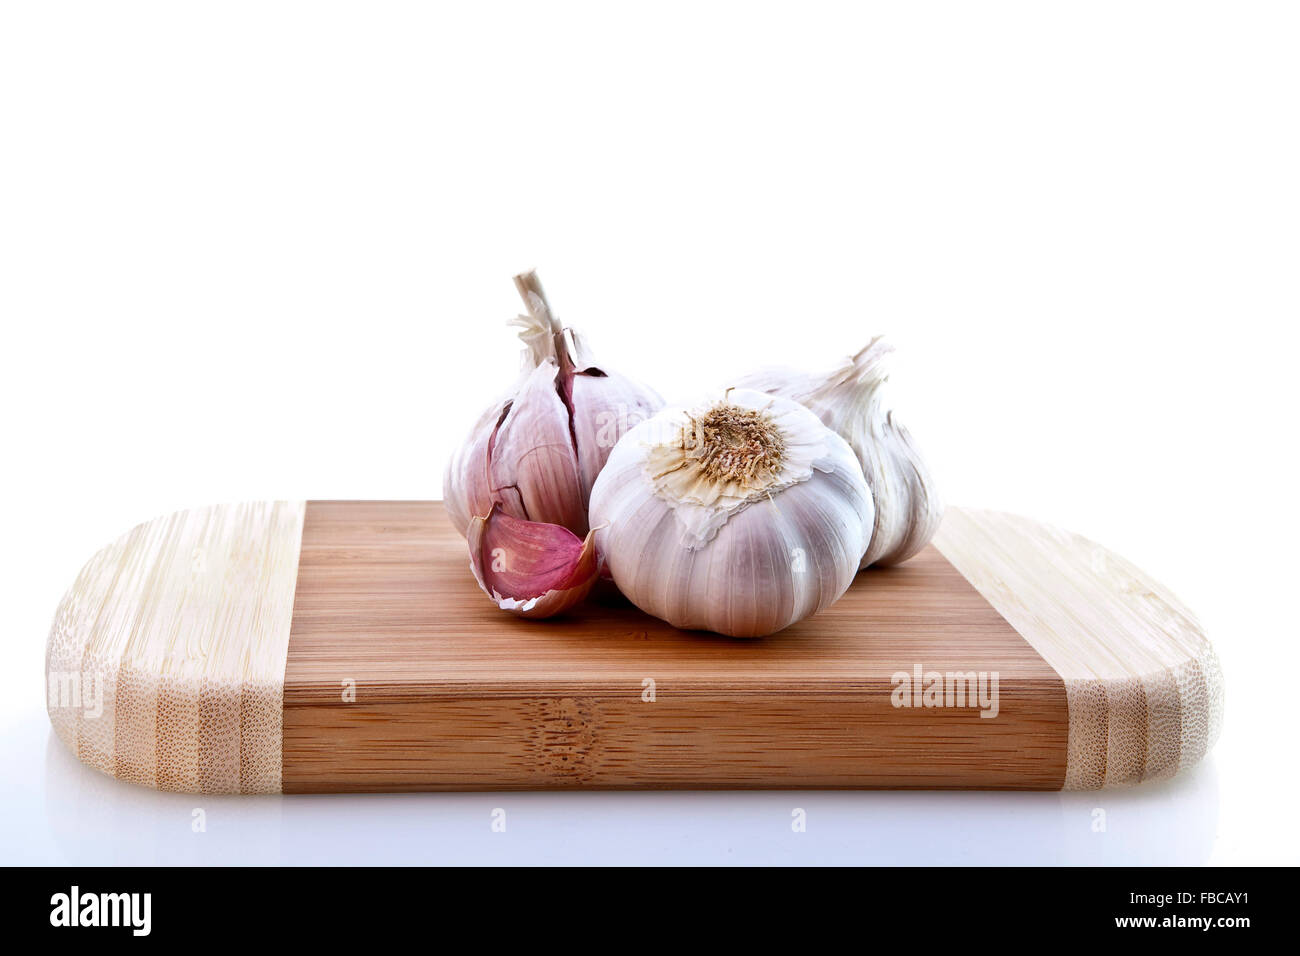 Cloves of garlic on wooden chopping board Stock Photo